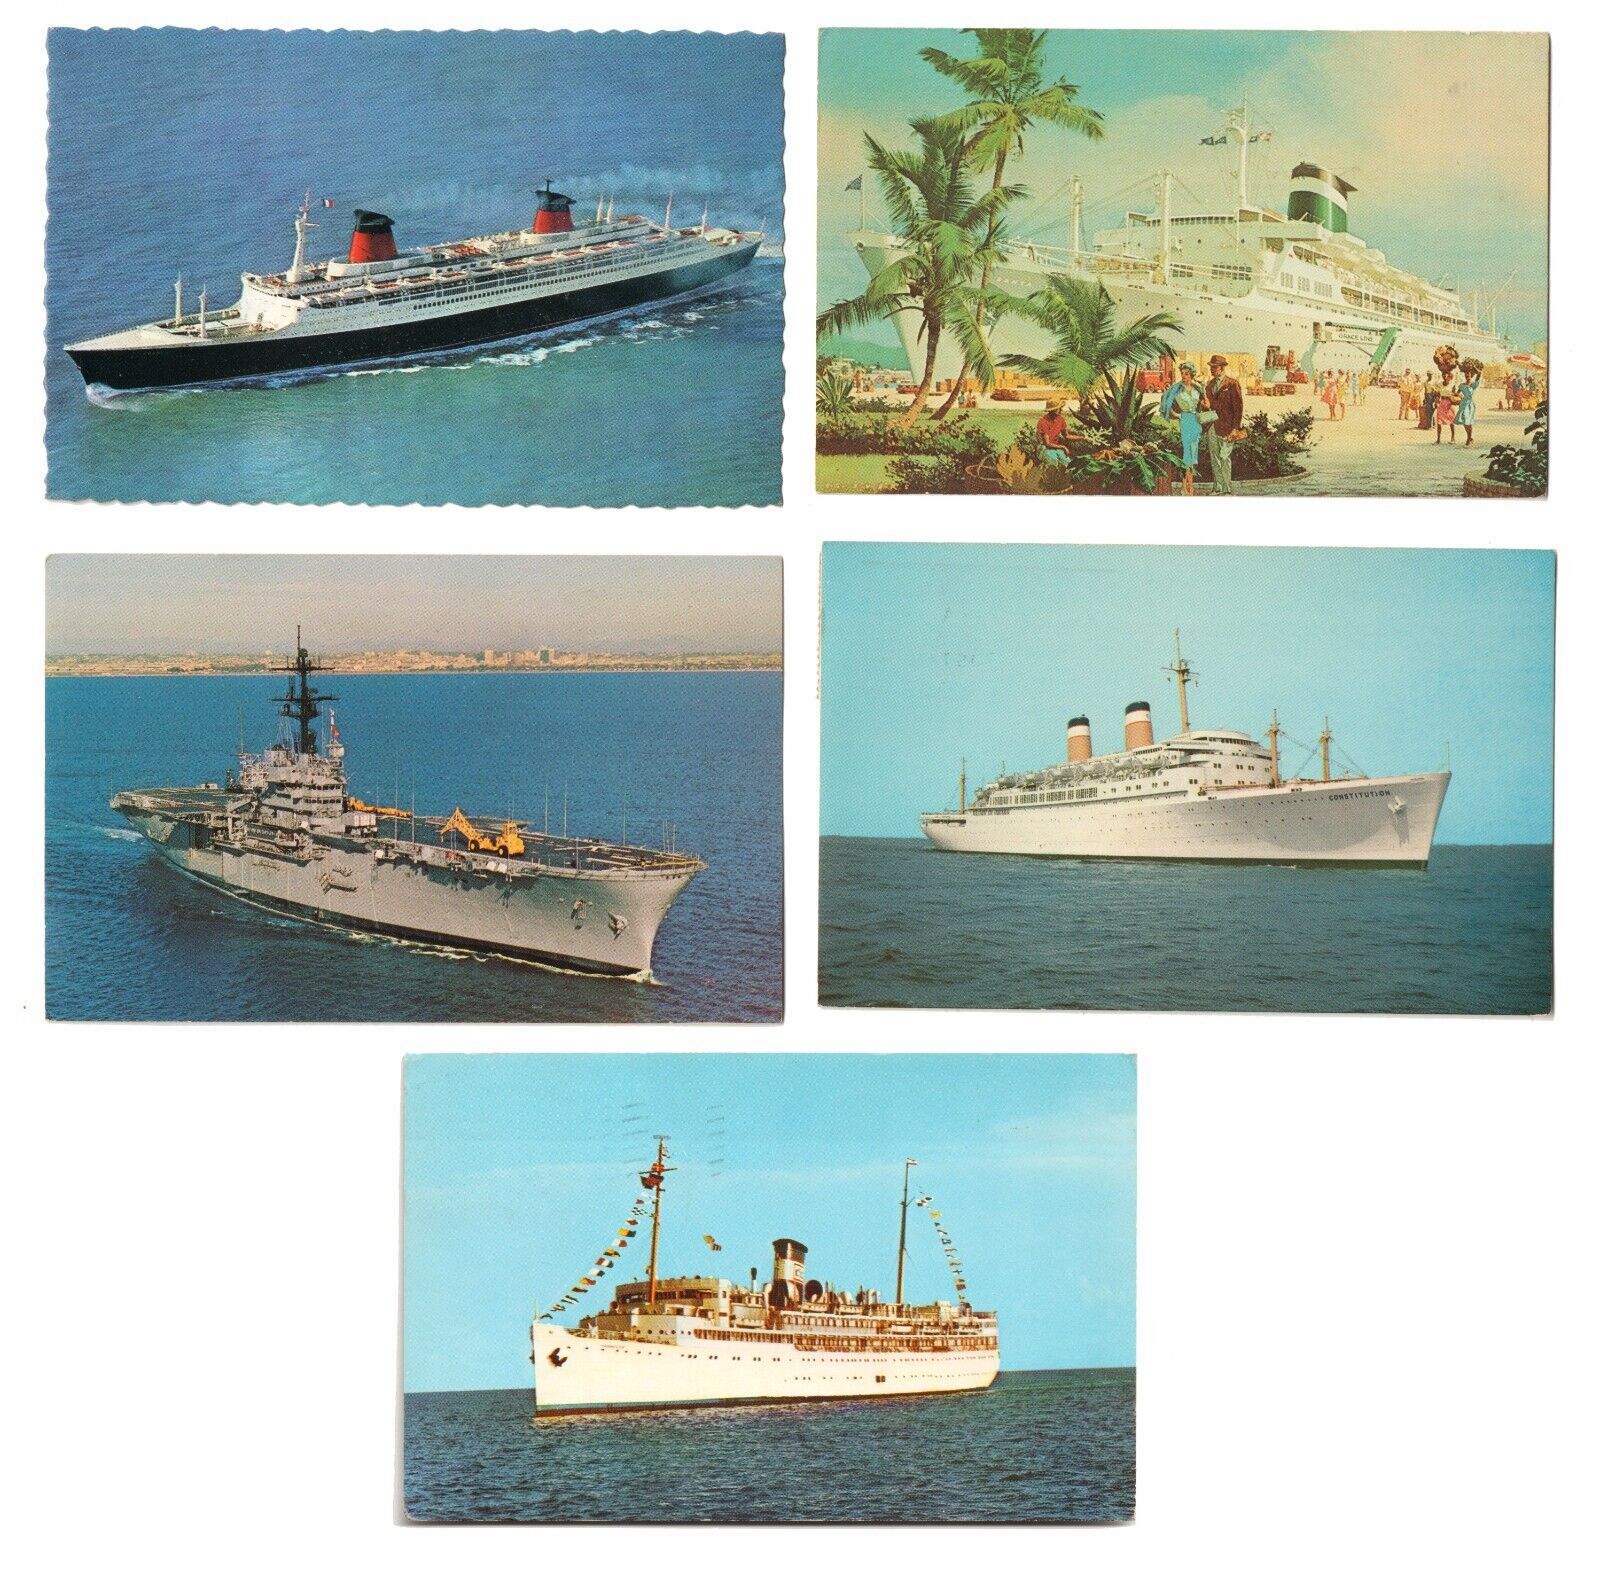 1960s SS YARMOUTH / CONSTITUTION GRACE / FRENCH LINE / USS NEW ORLEANS Postcards